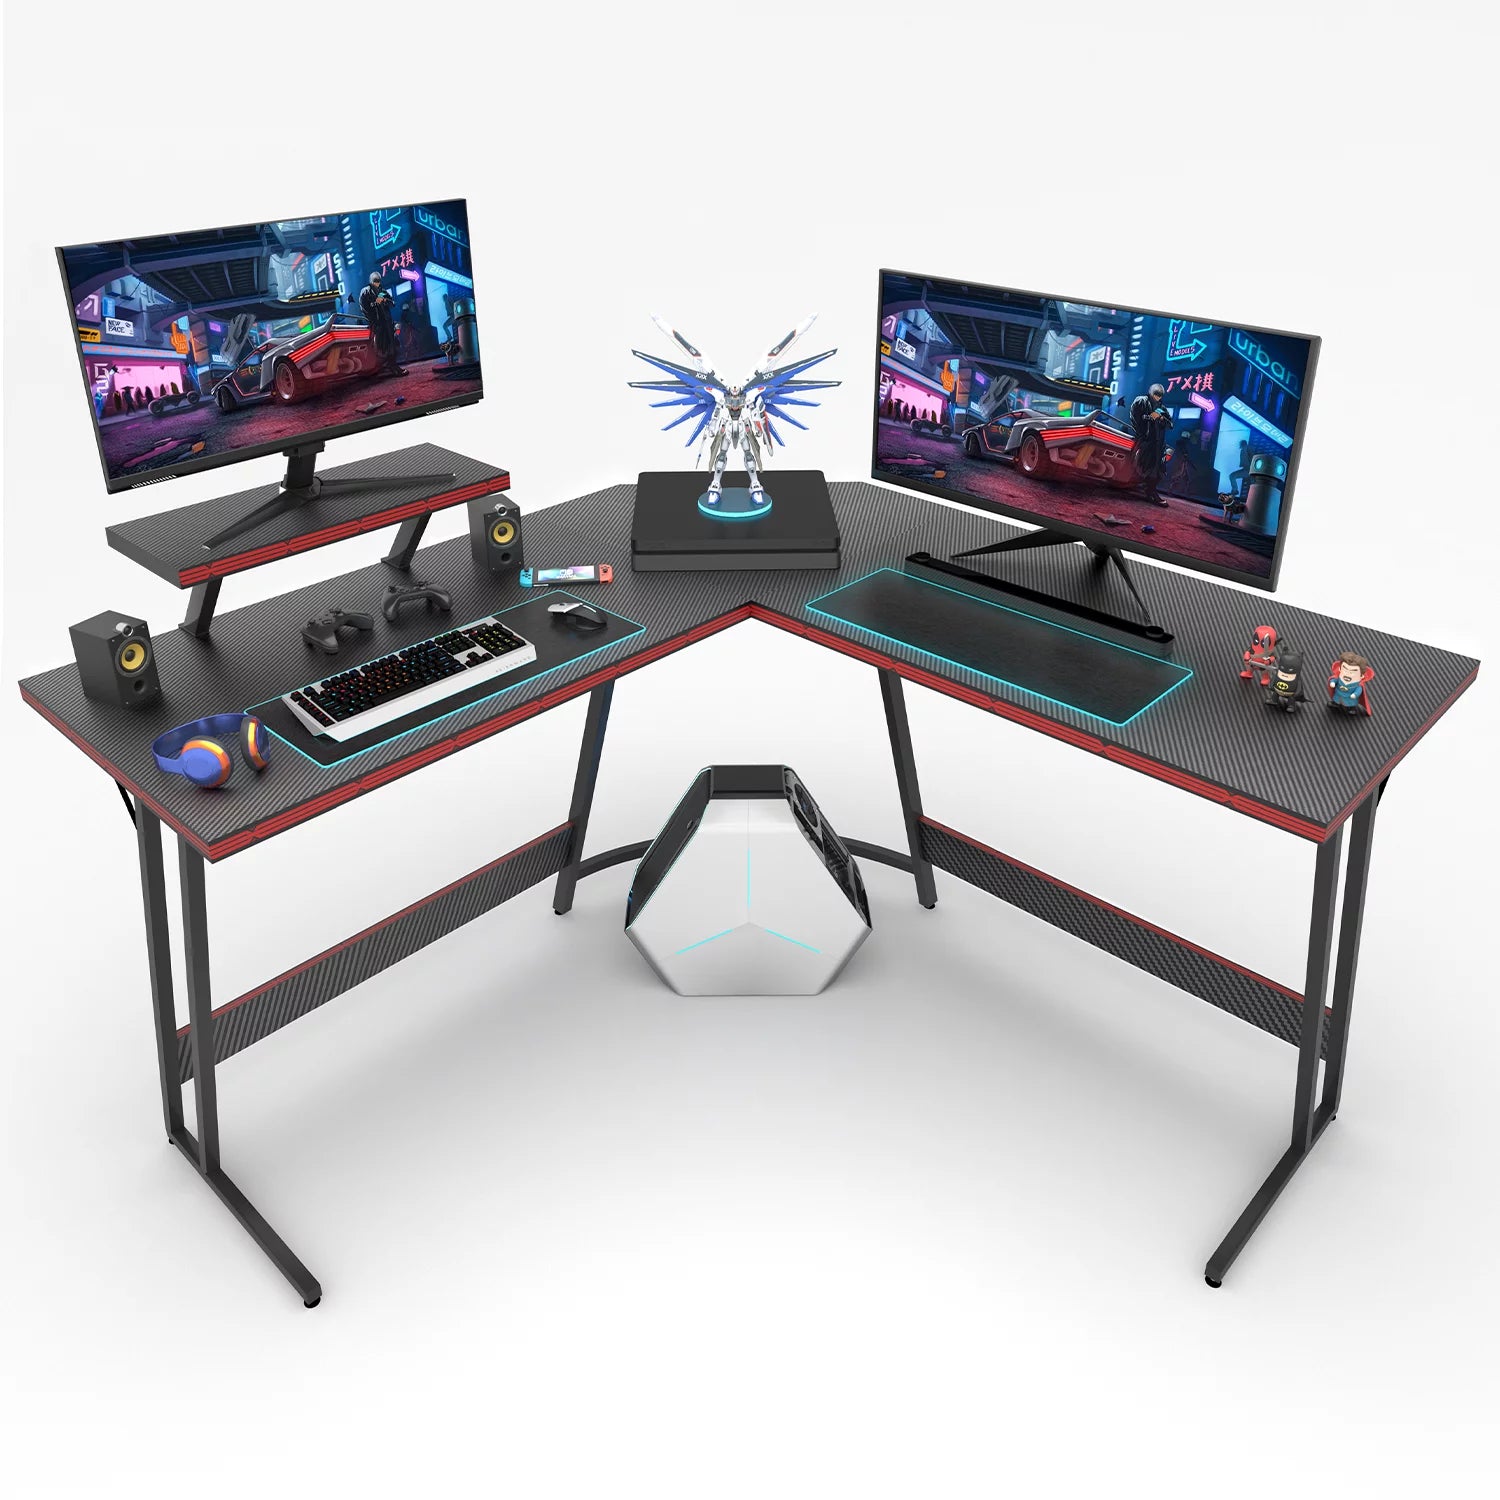 Gaming Tables – Ergonomics, Durability, and Options